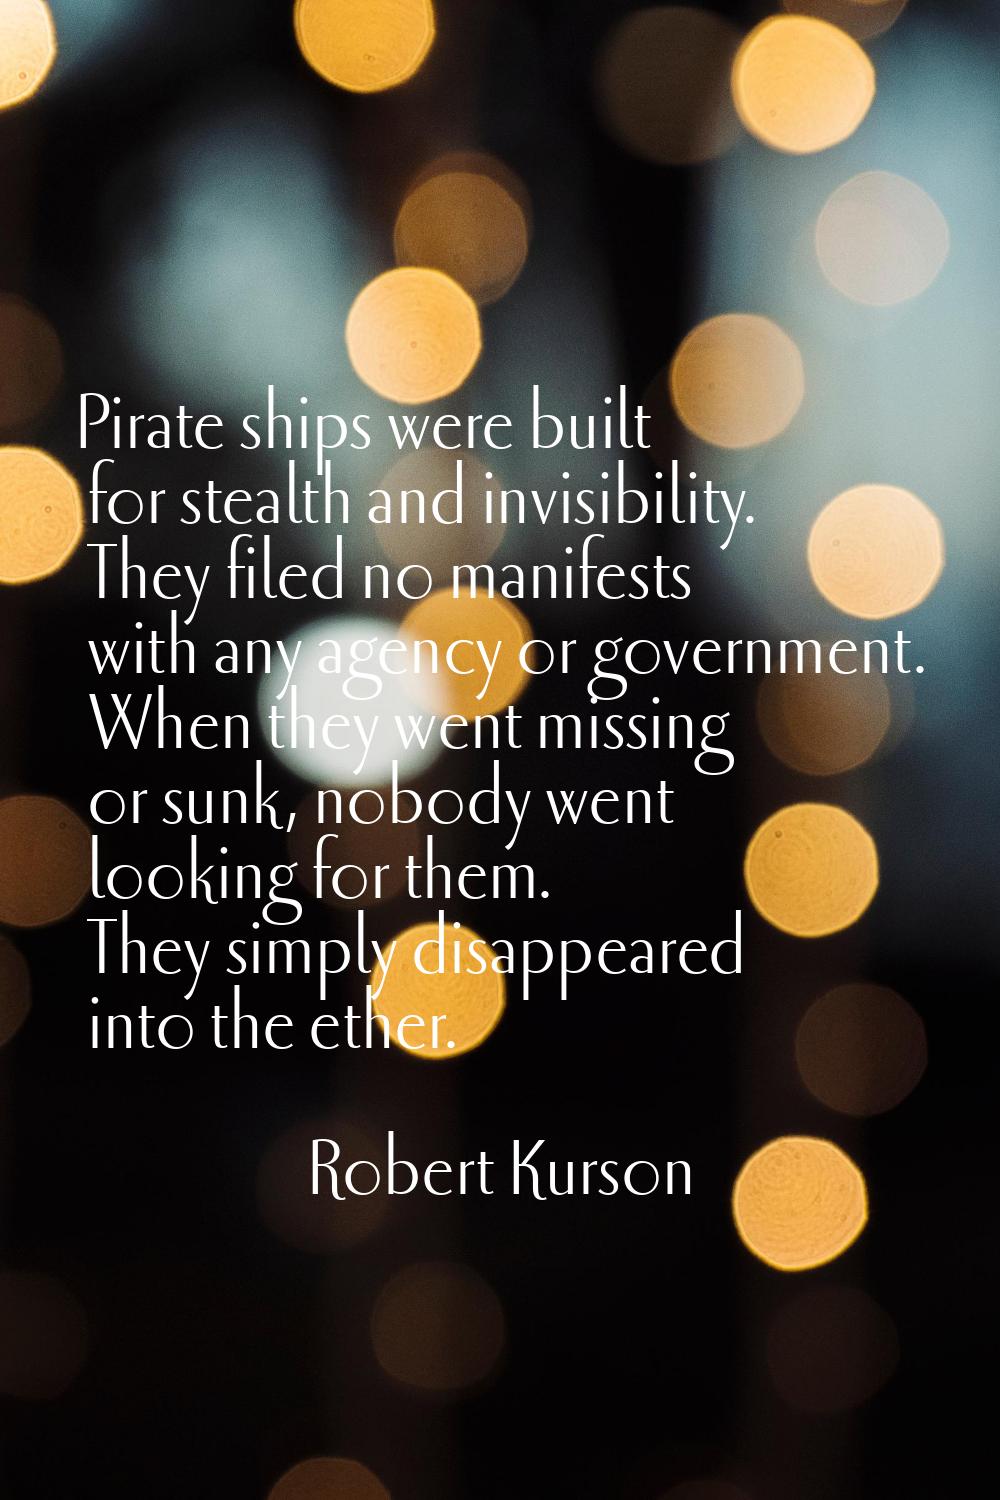 Pirate ships were built for stealth and invisibility. They filed no manifests with any agency or go